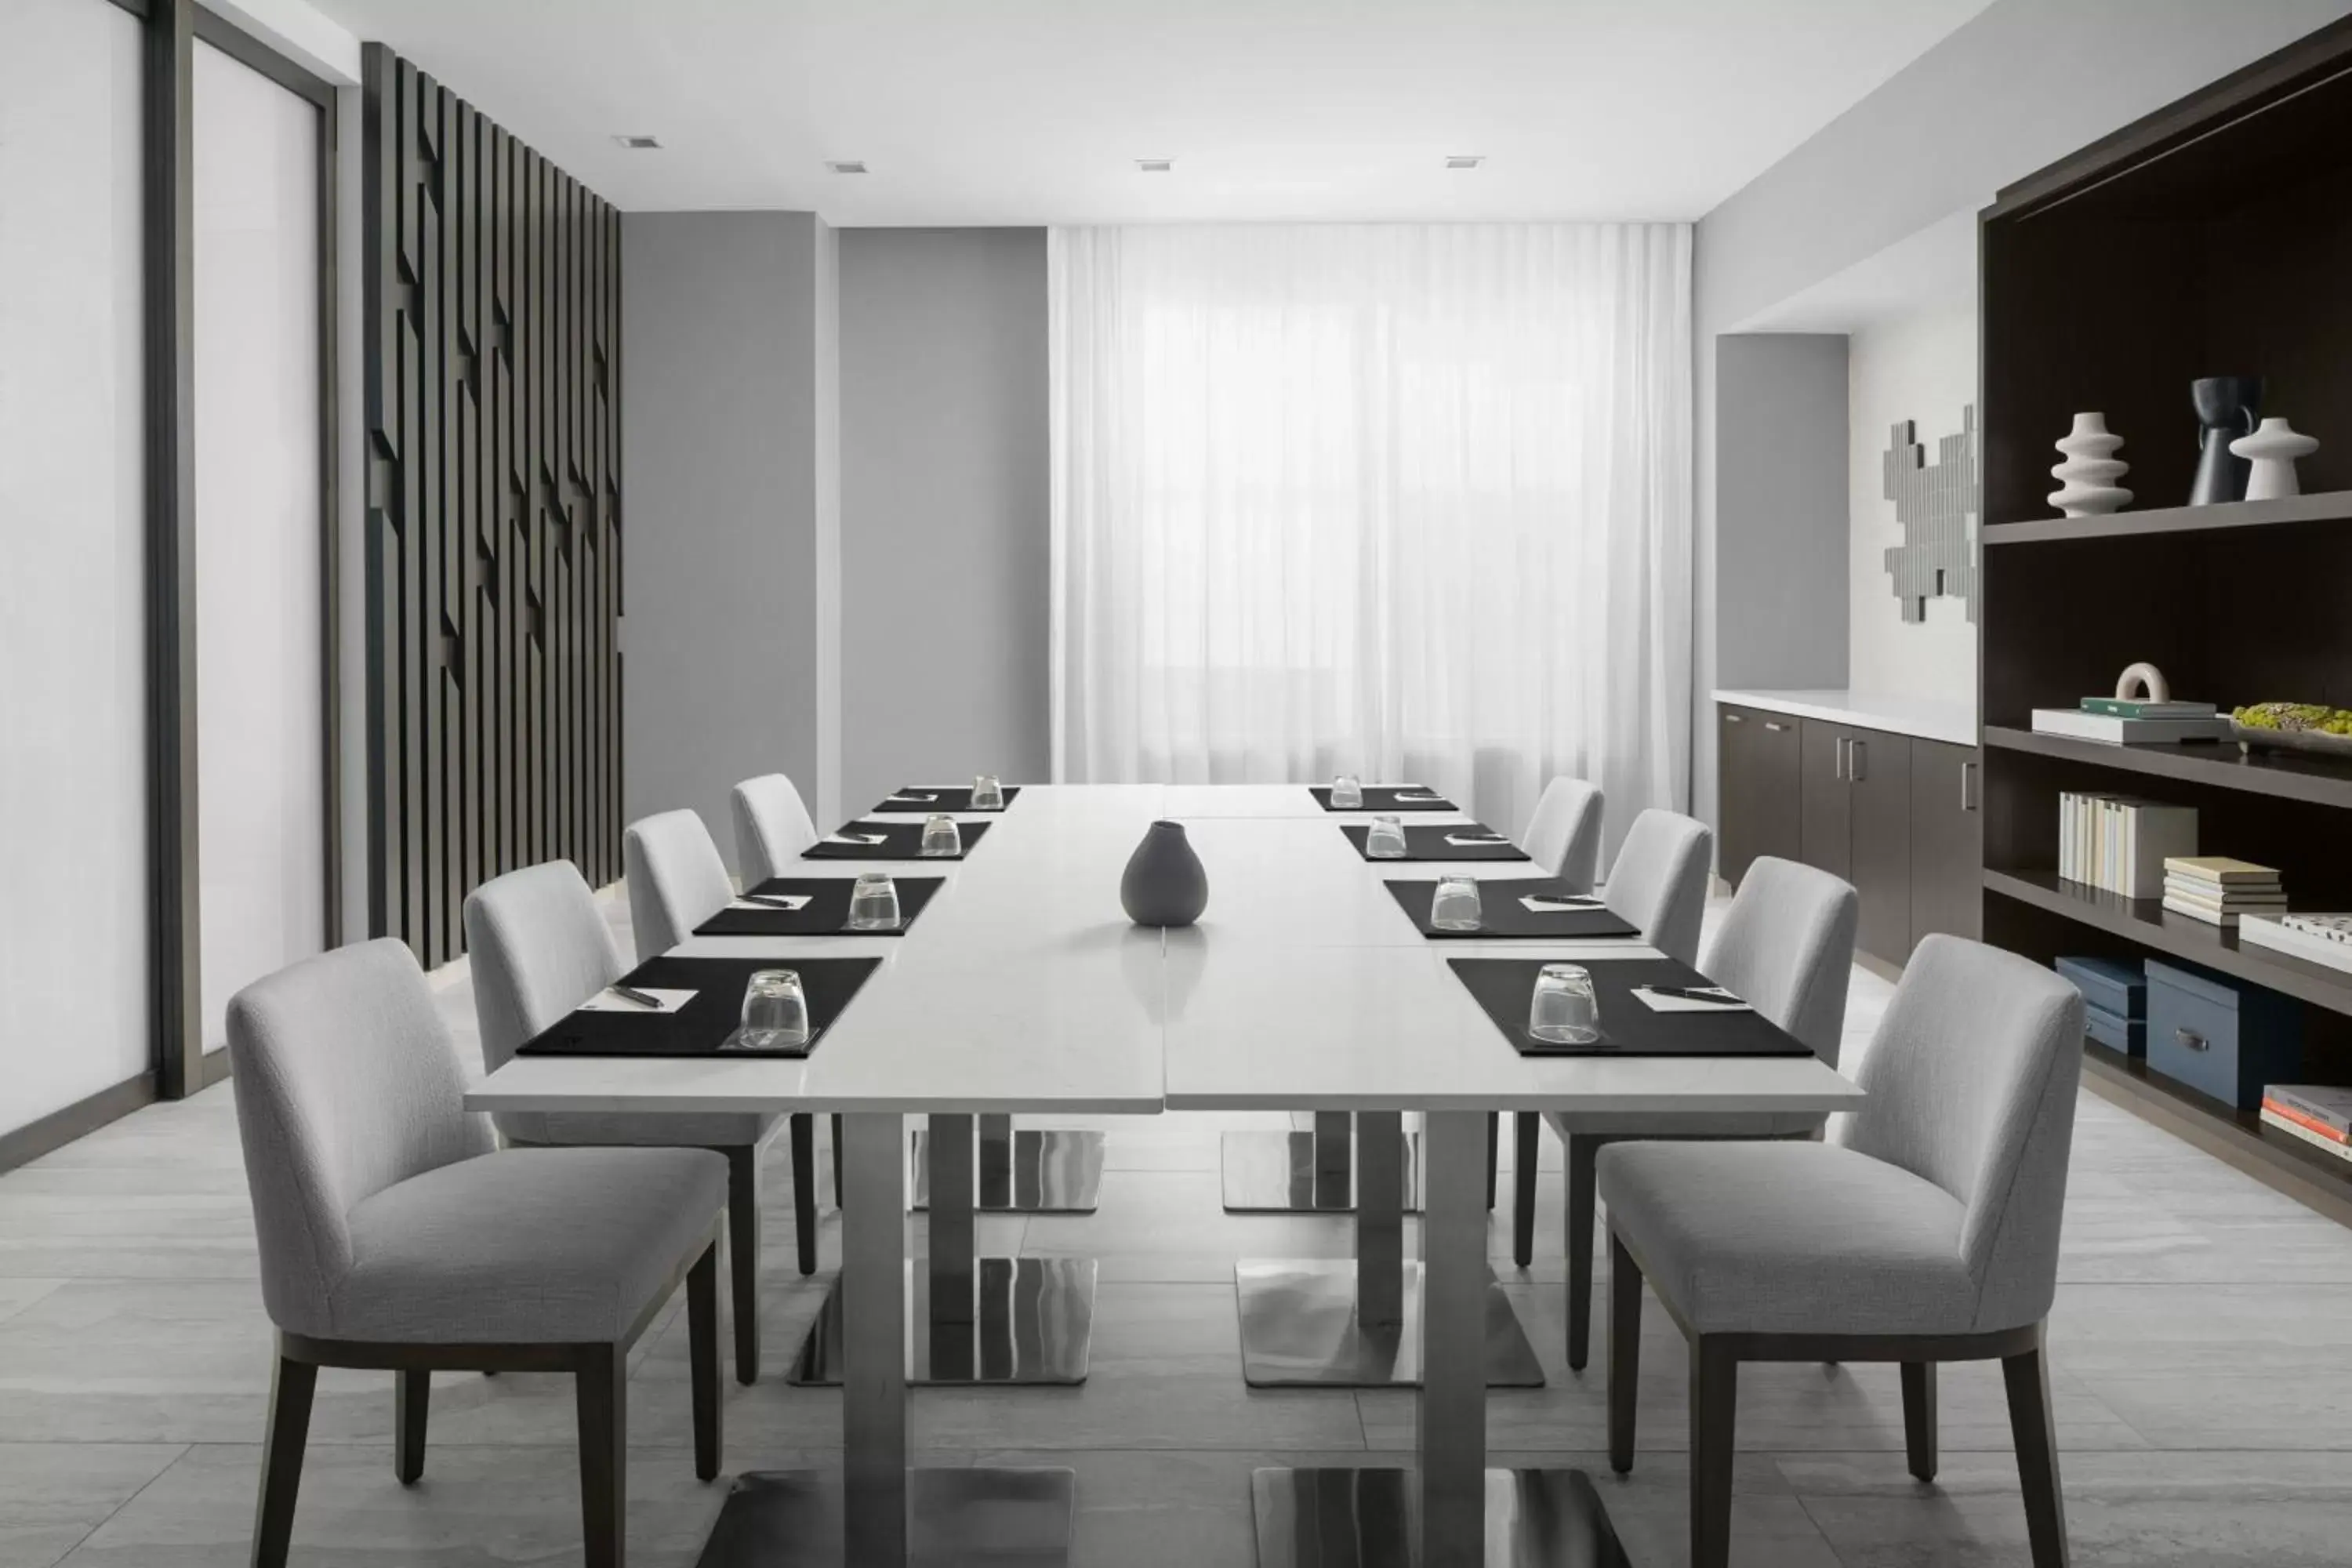 Meeting/conference room in AC Hotel by Marriott Miami Dadeland